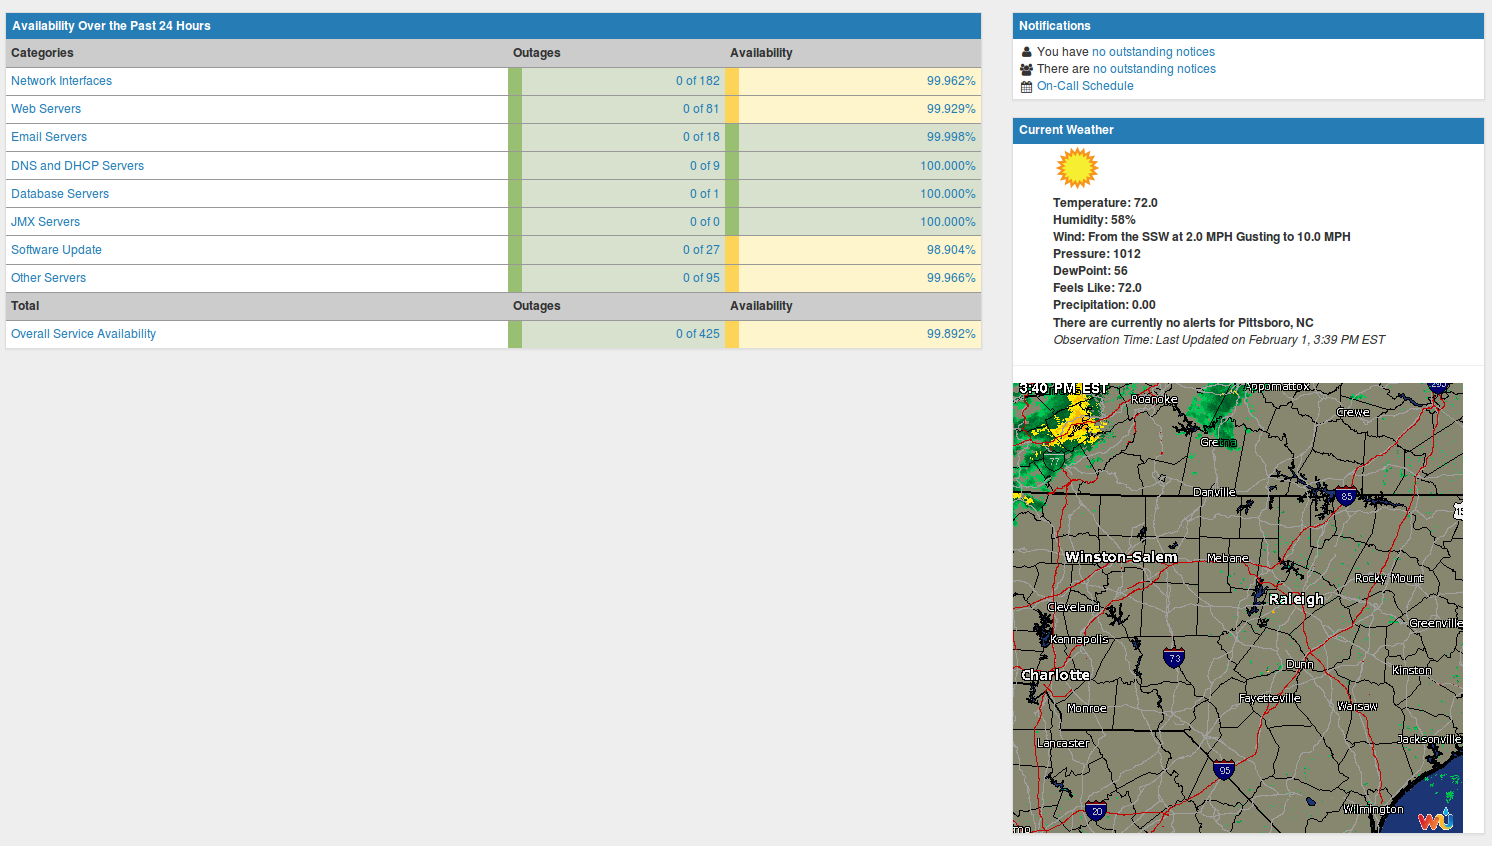 Weathermap on OpenNMS Home Page